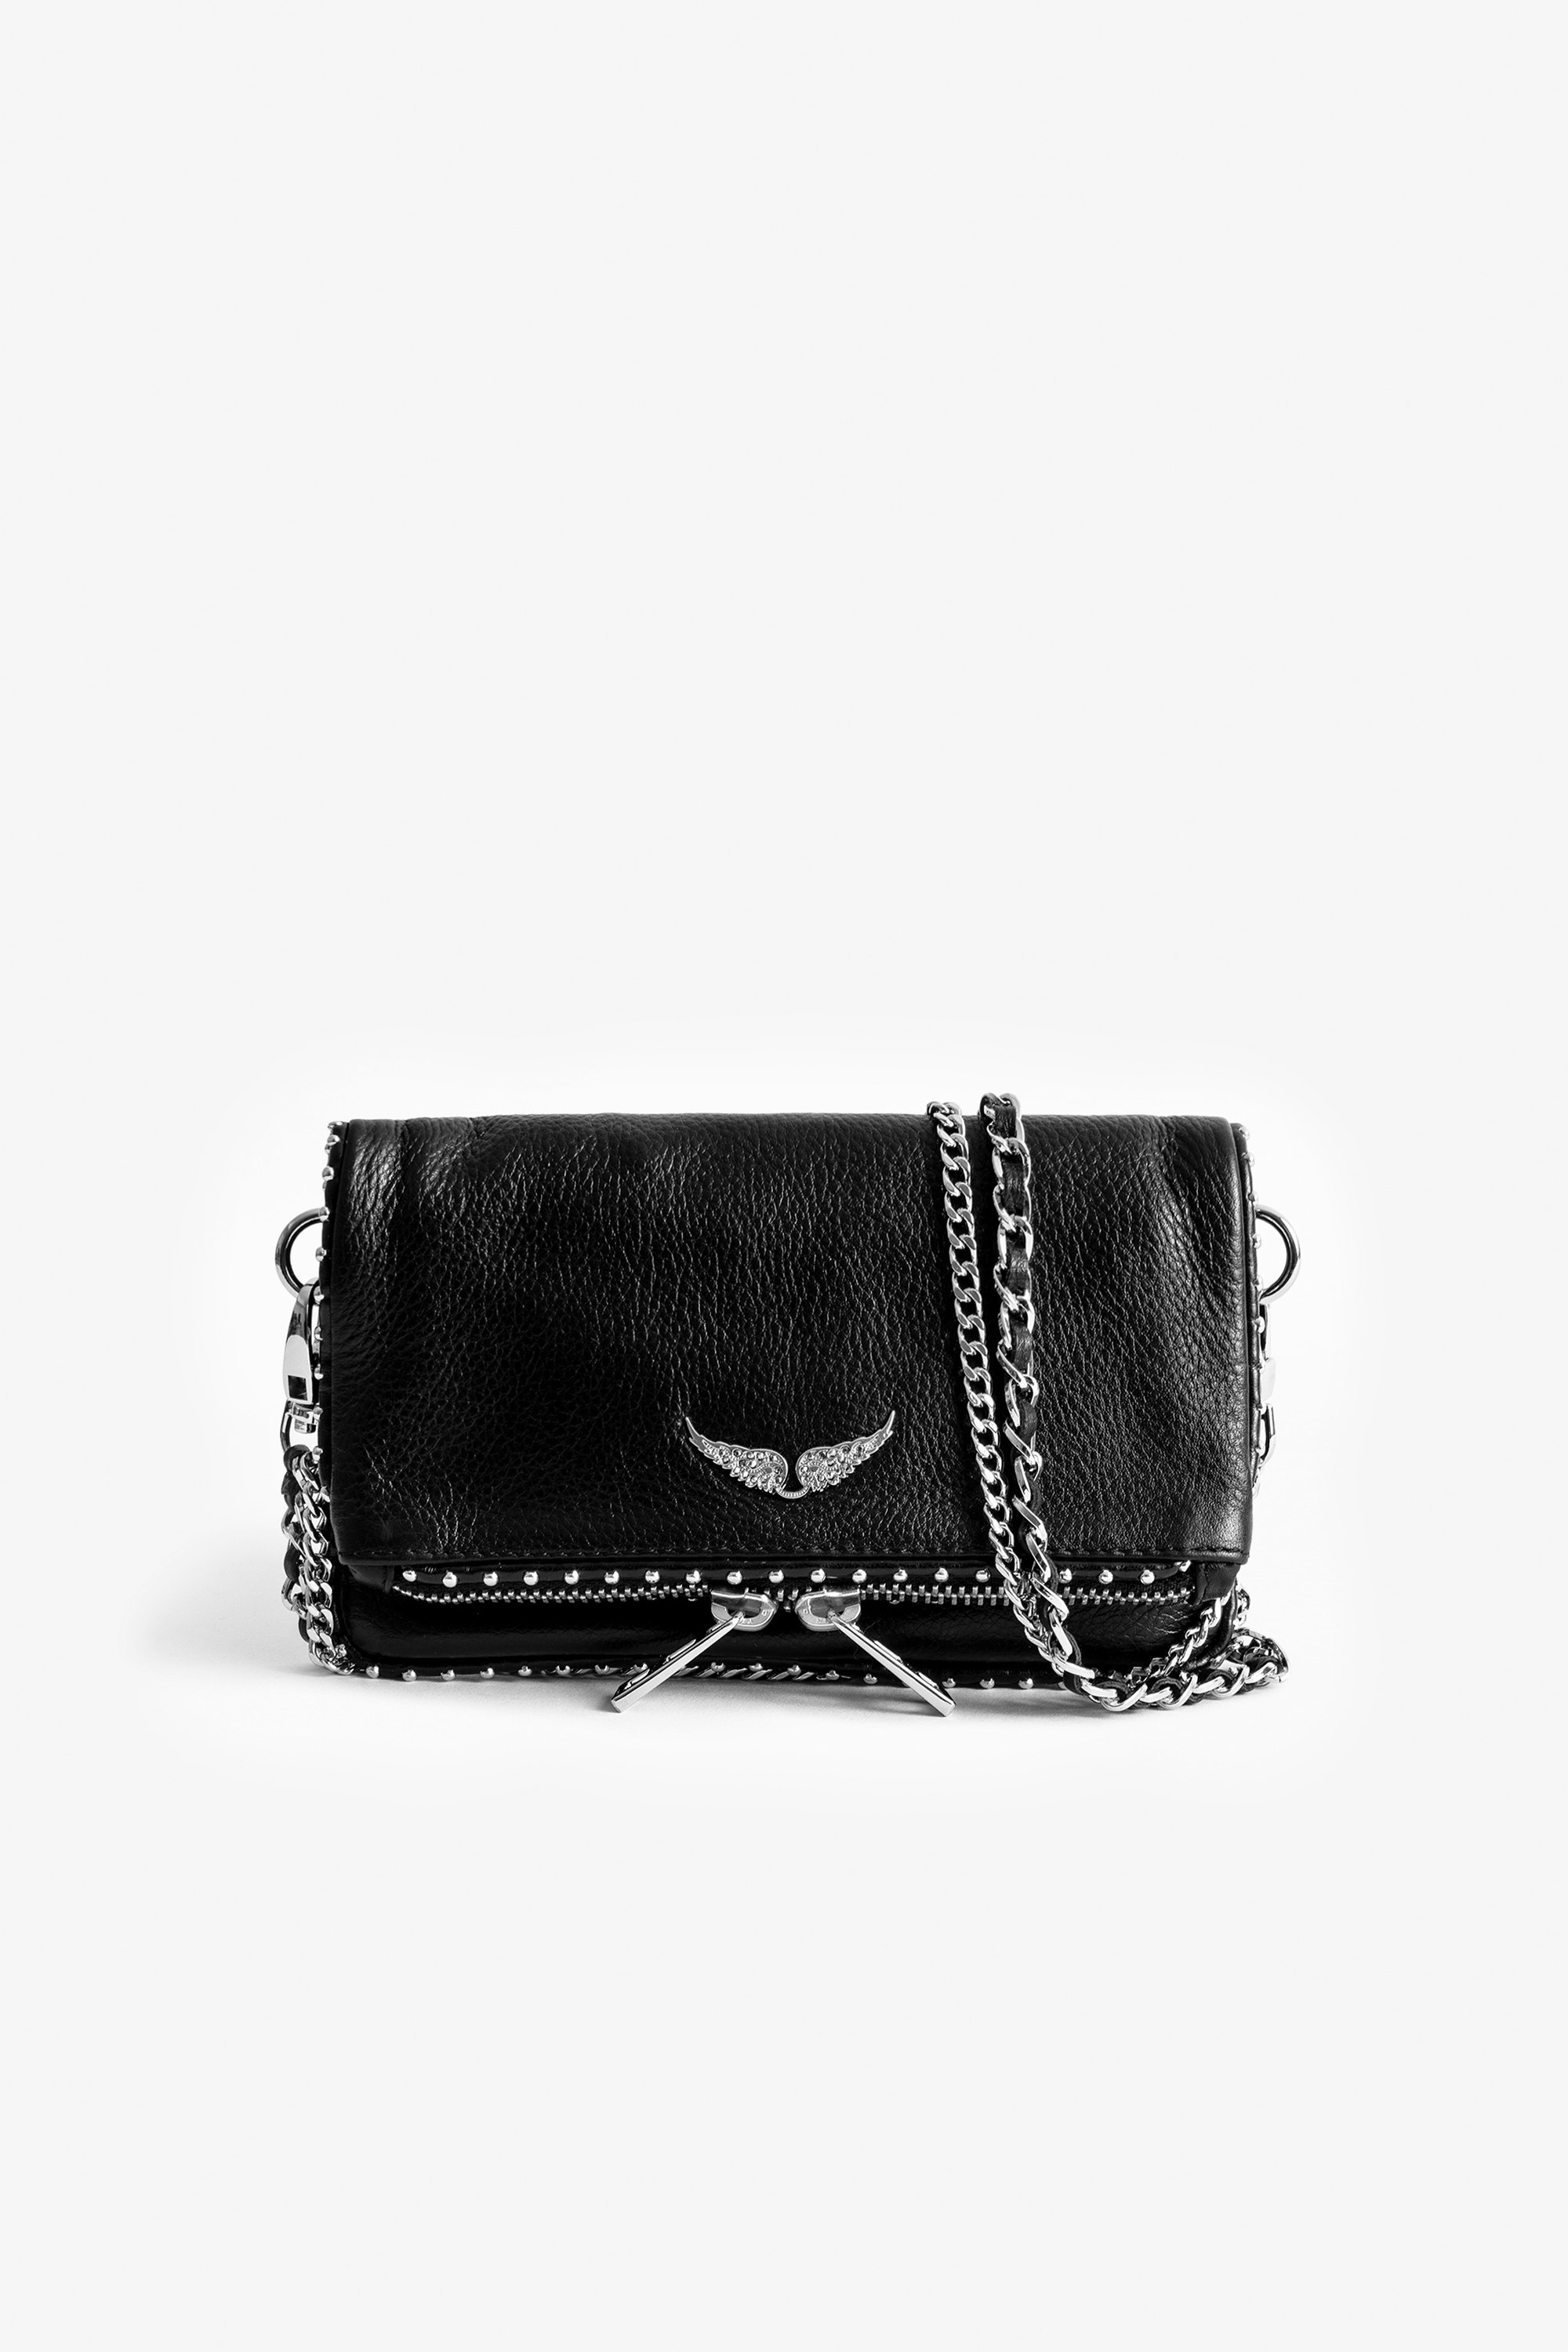 Rock Nano Studs クラッチバッグ Women's black mini clutch in leather, embellished with studs.